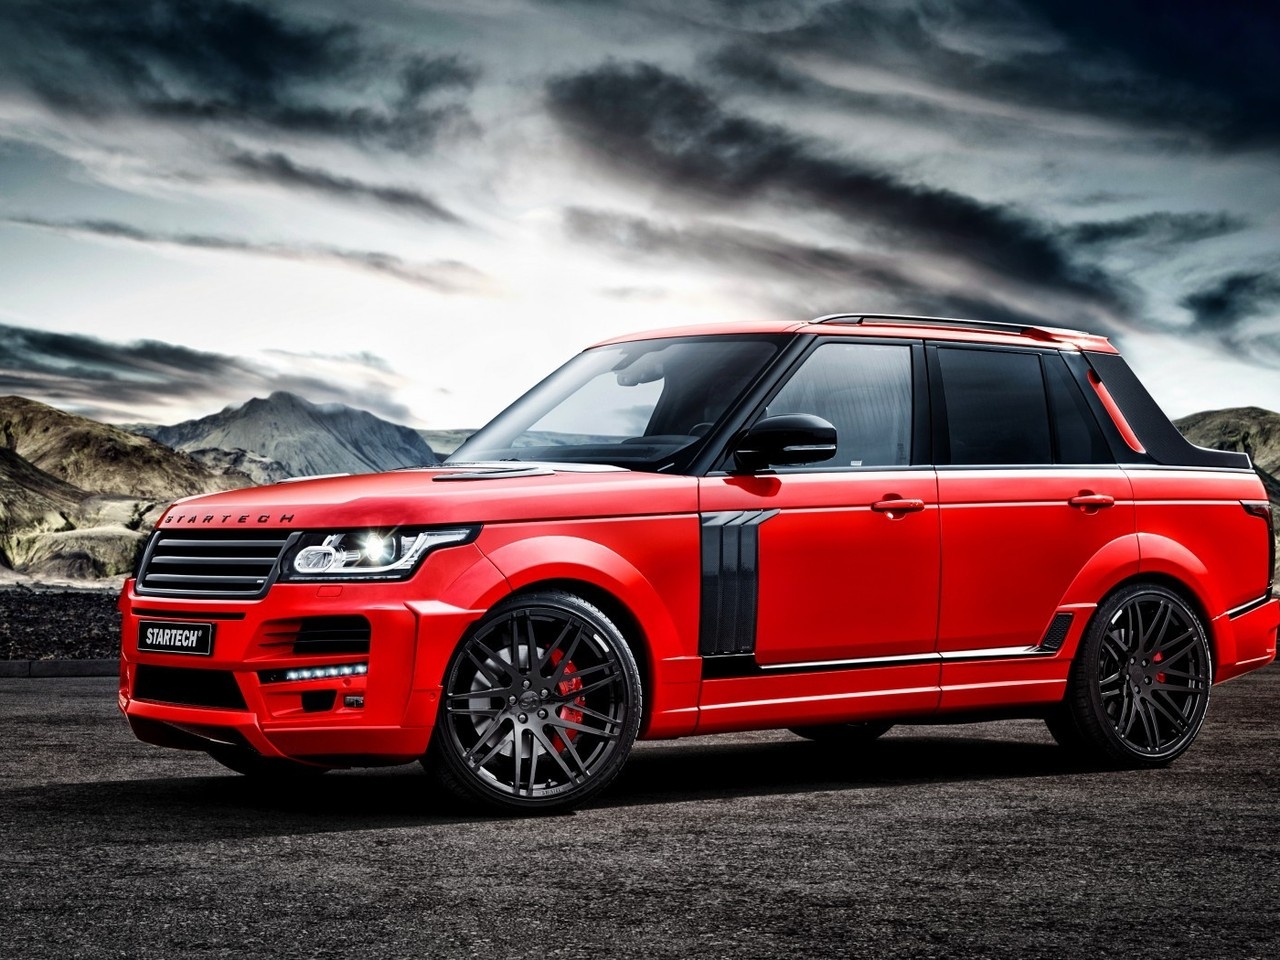 Red Startech Range Rover Pickup for 1280 x 960 resolution